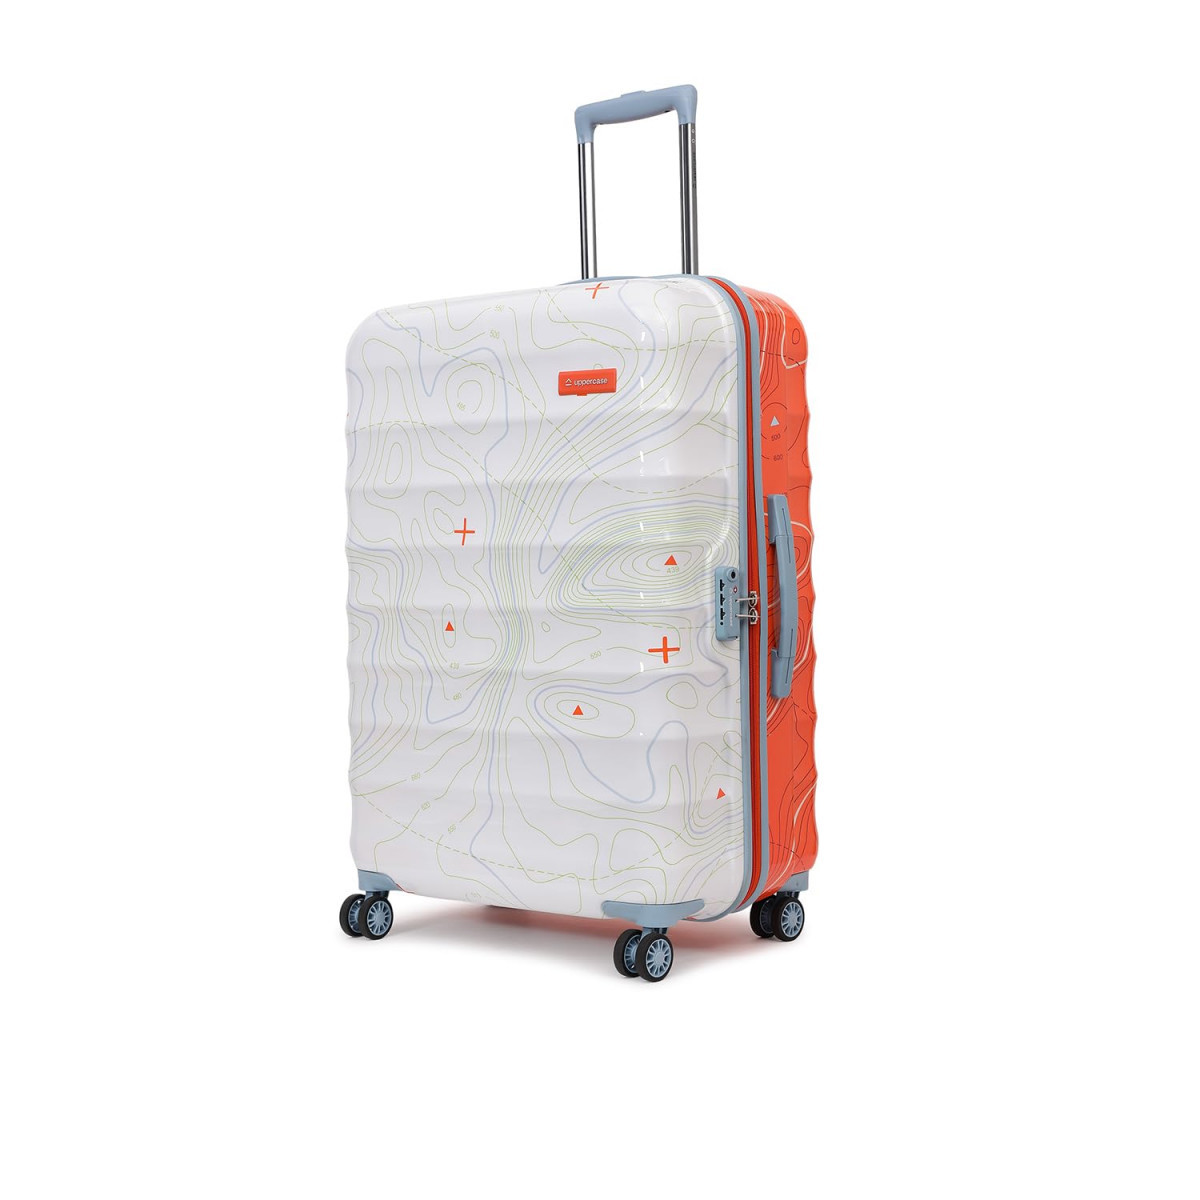 uppercase Topo Medium 66 Cms Printed Hardsided Check-In Trolley Bag 8 Wheel Spinner Sustainable Luggage With Tsa Lock  Anti-Theft Zippers 2000 Days Warranty Dual Tone Orange  White